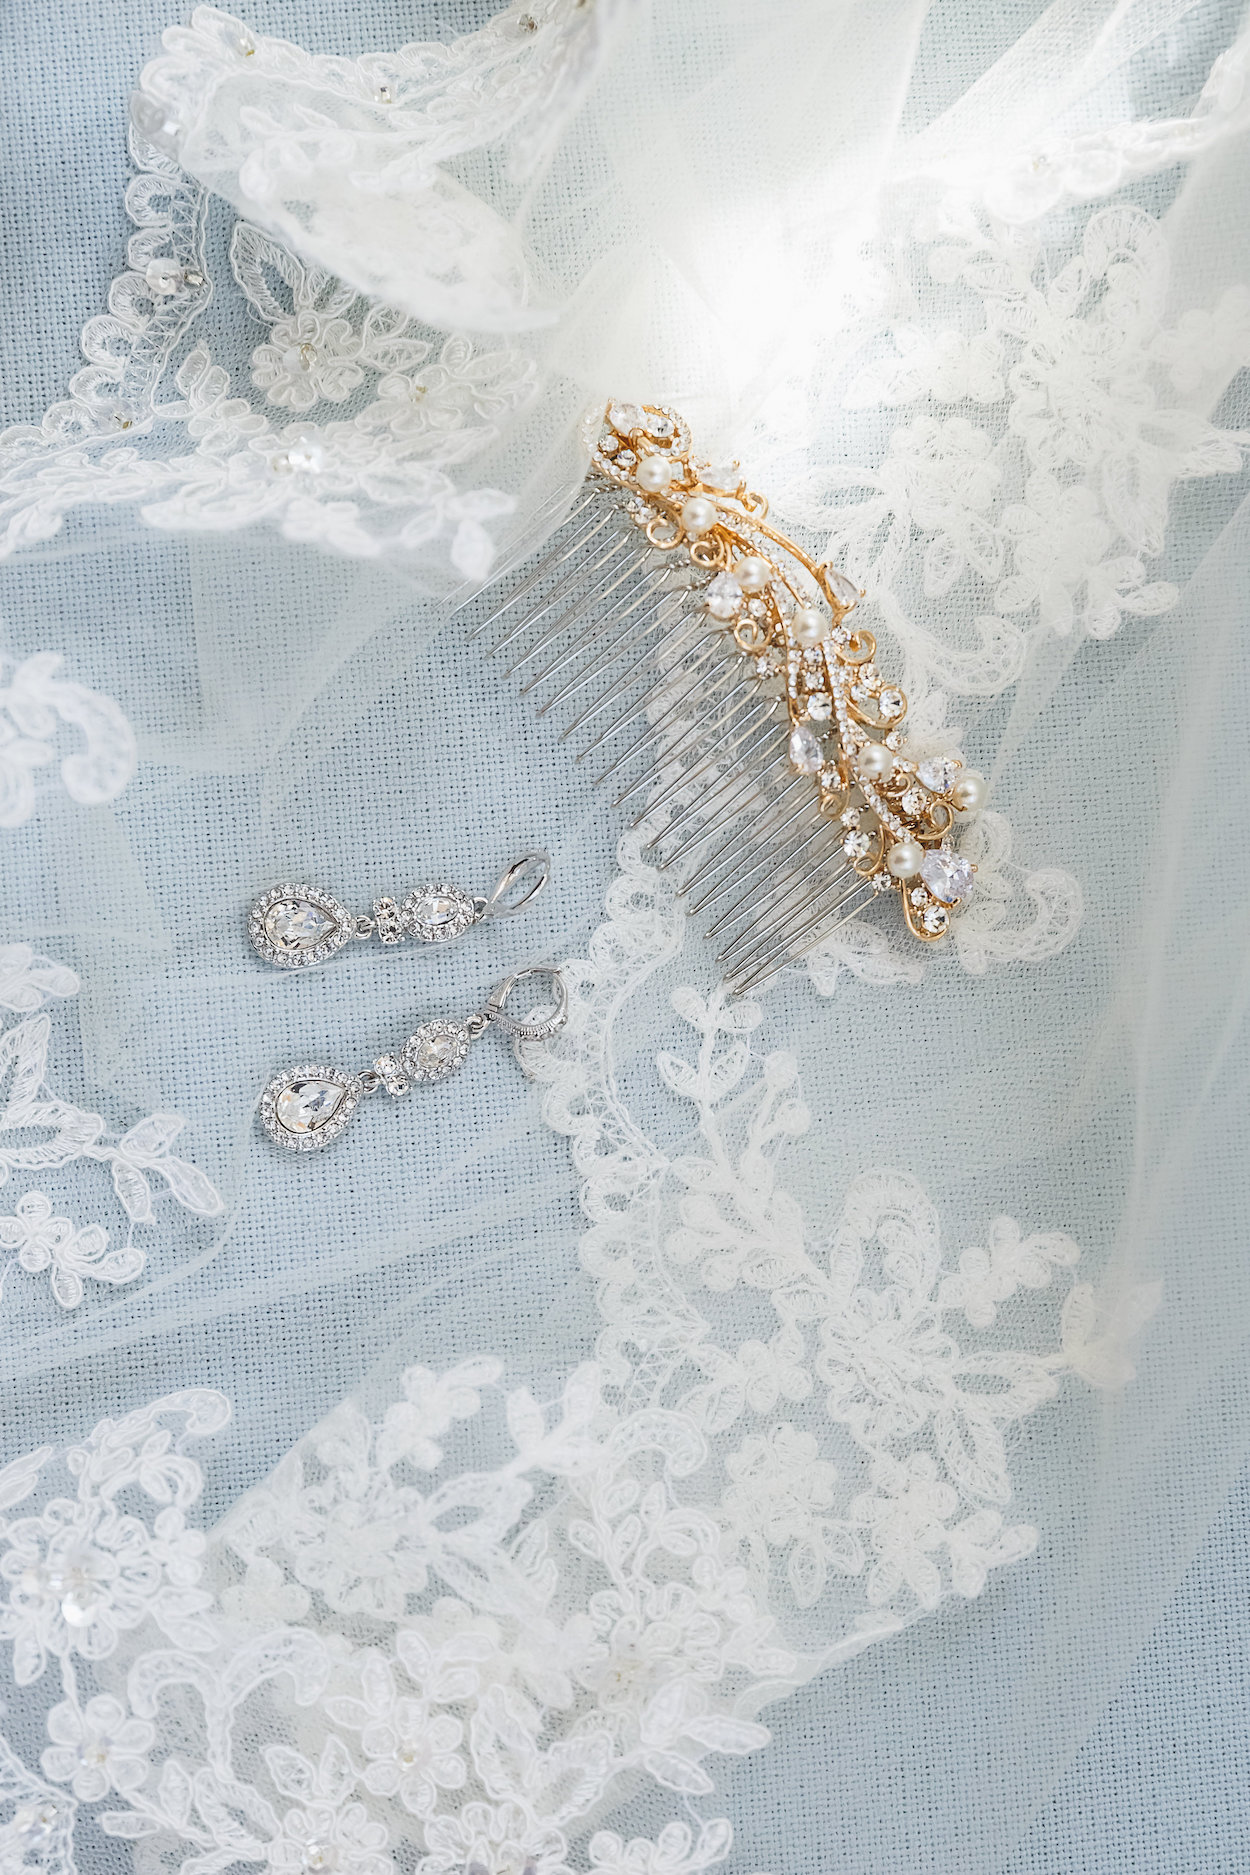 Gorgeous Lace Lined Bridal Veil - Science Museum of Virginia Wedding